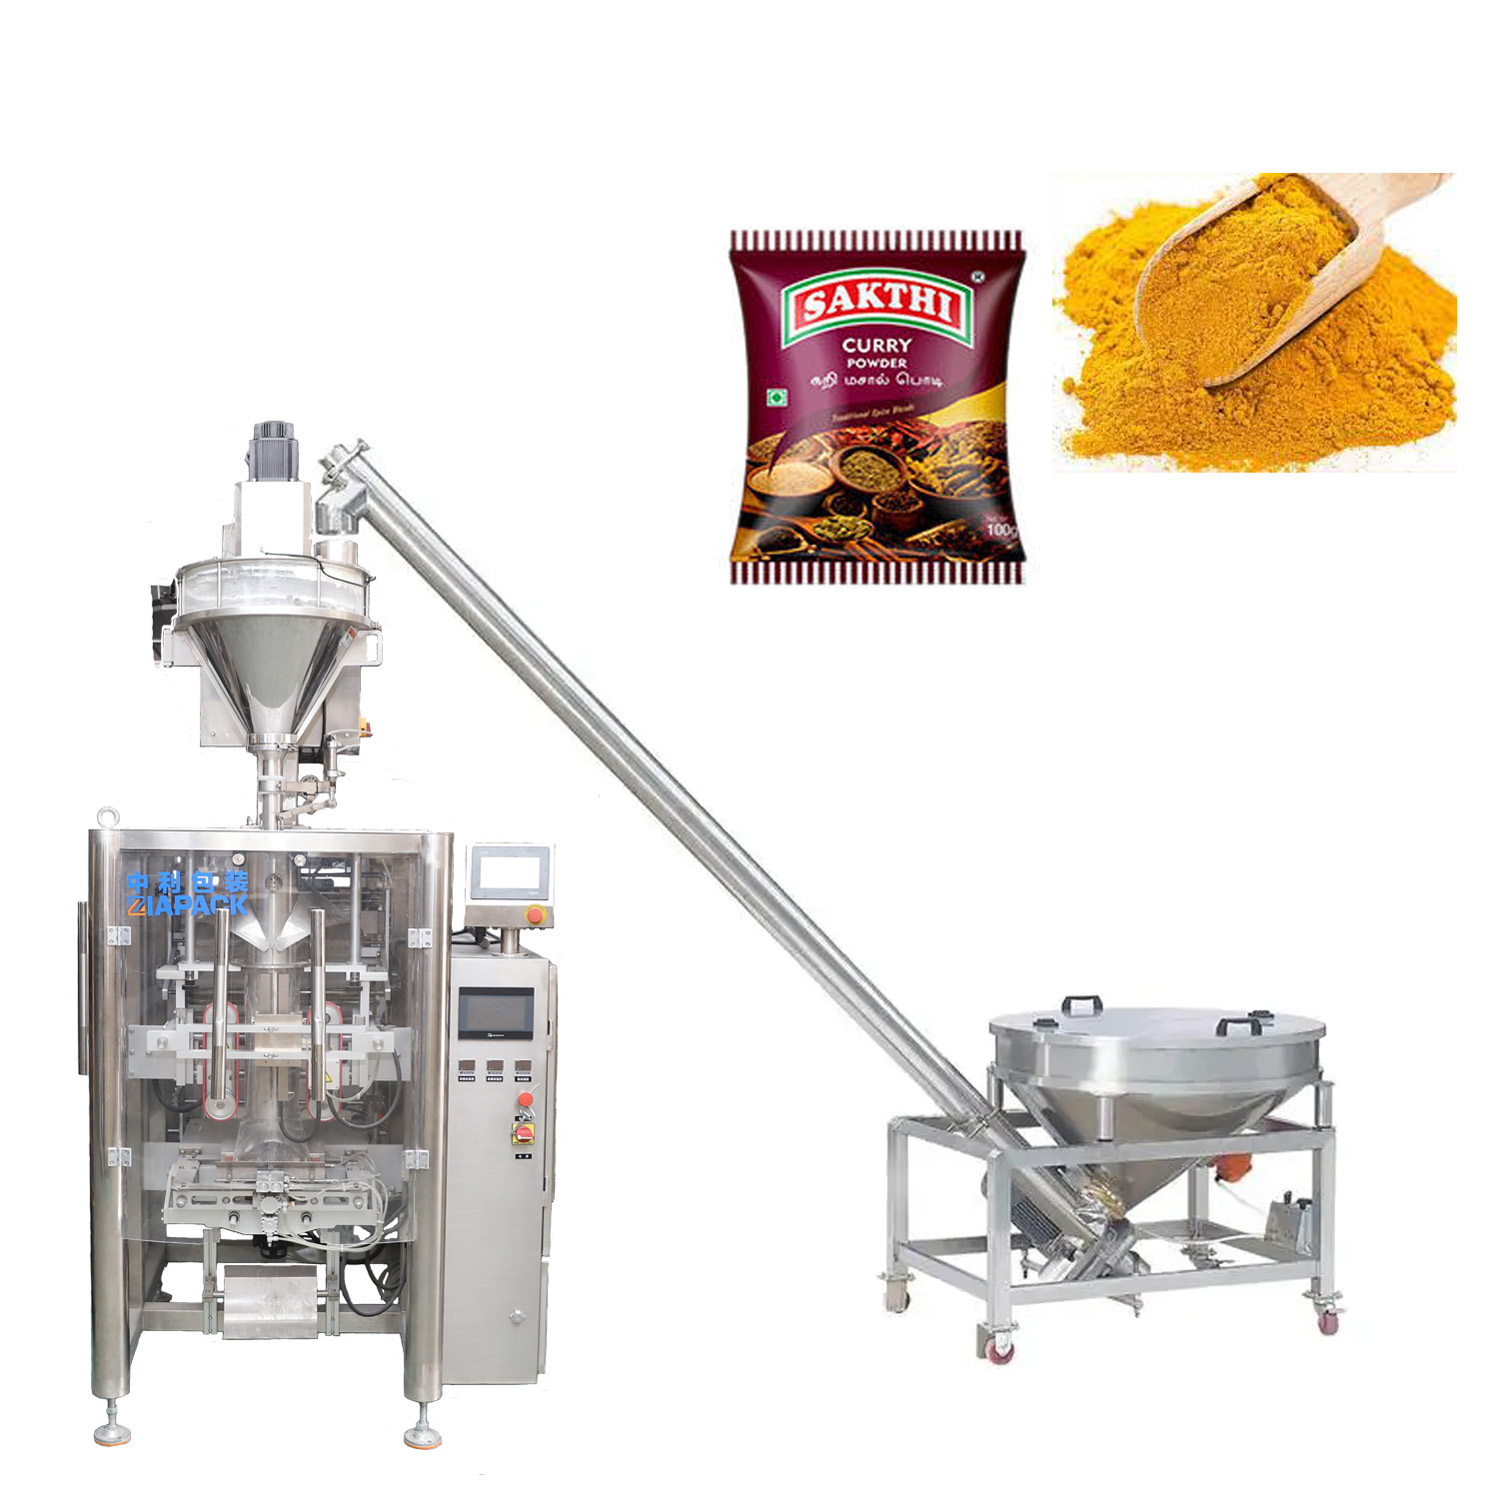 1kg-10kg Powder Automatic Screw Filling and Packing Machine